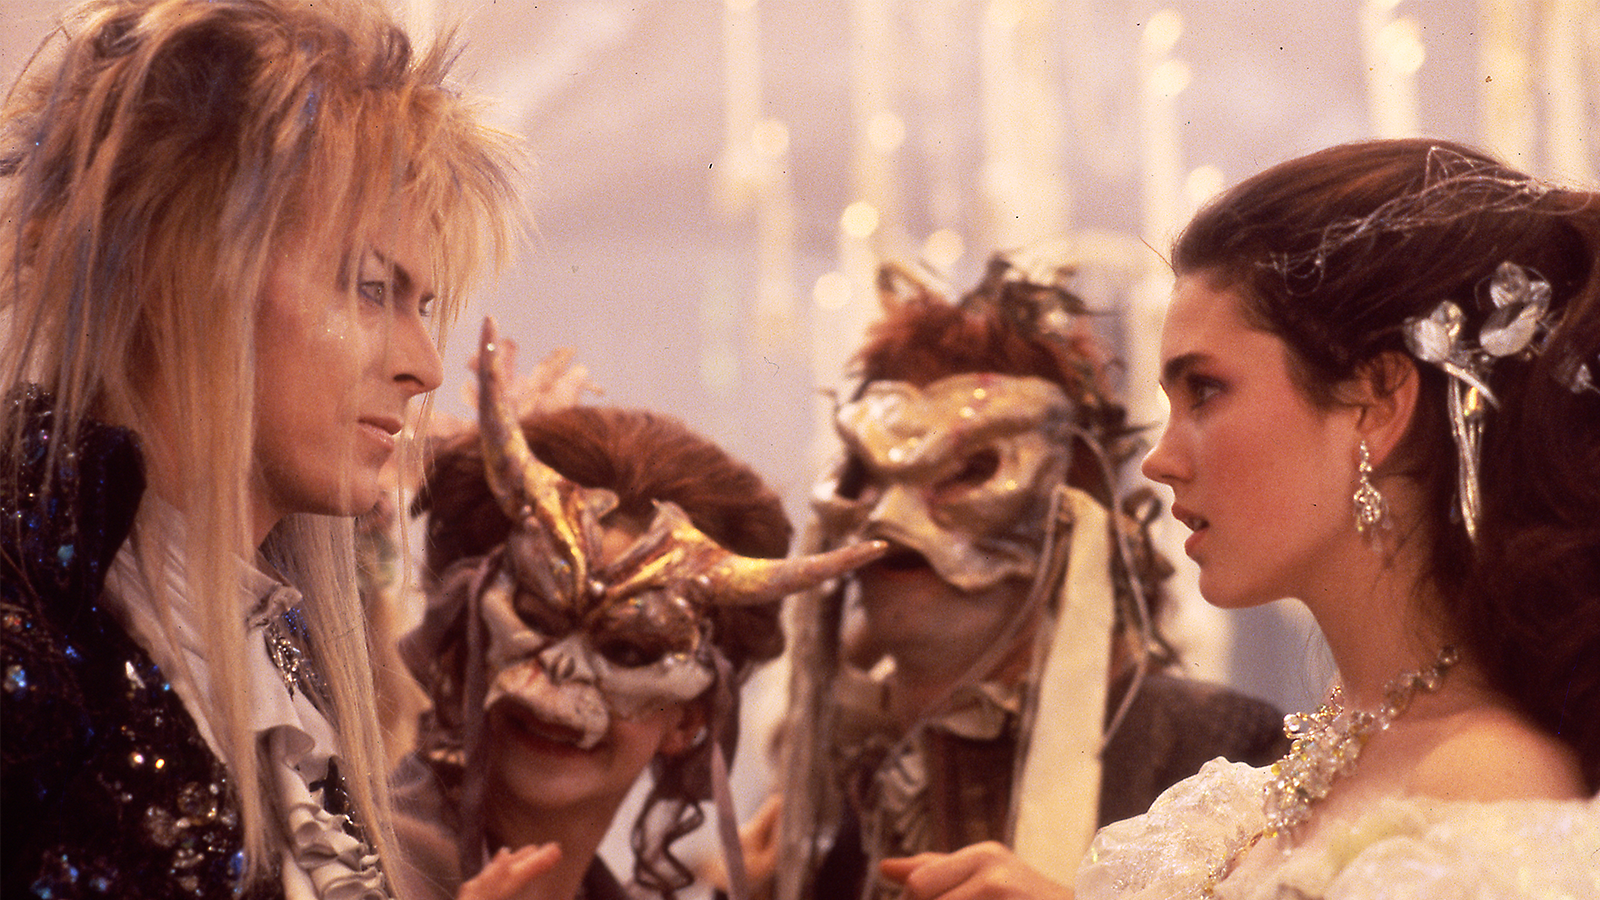 Jareth the Goblin King and Sarah in the ballroom in Labyrinth.